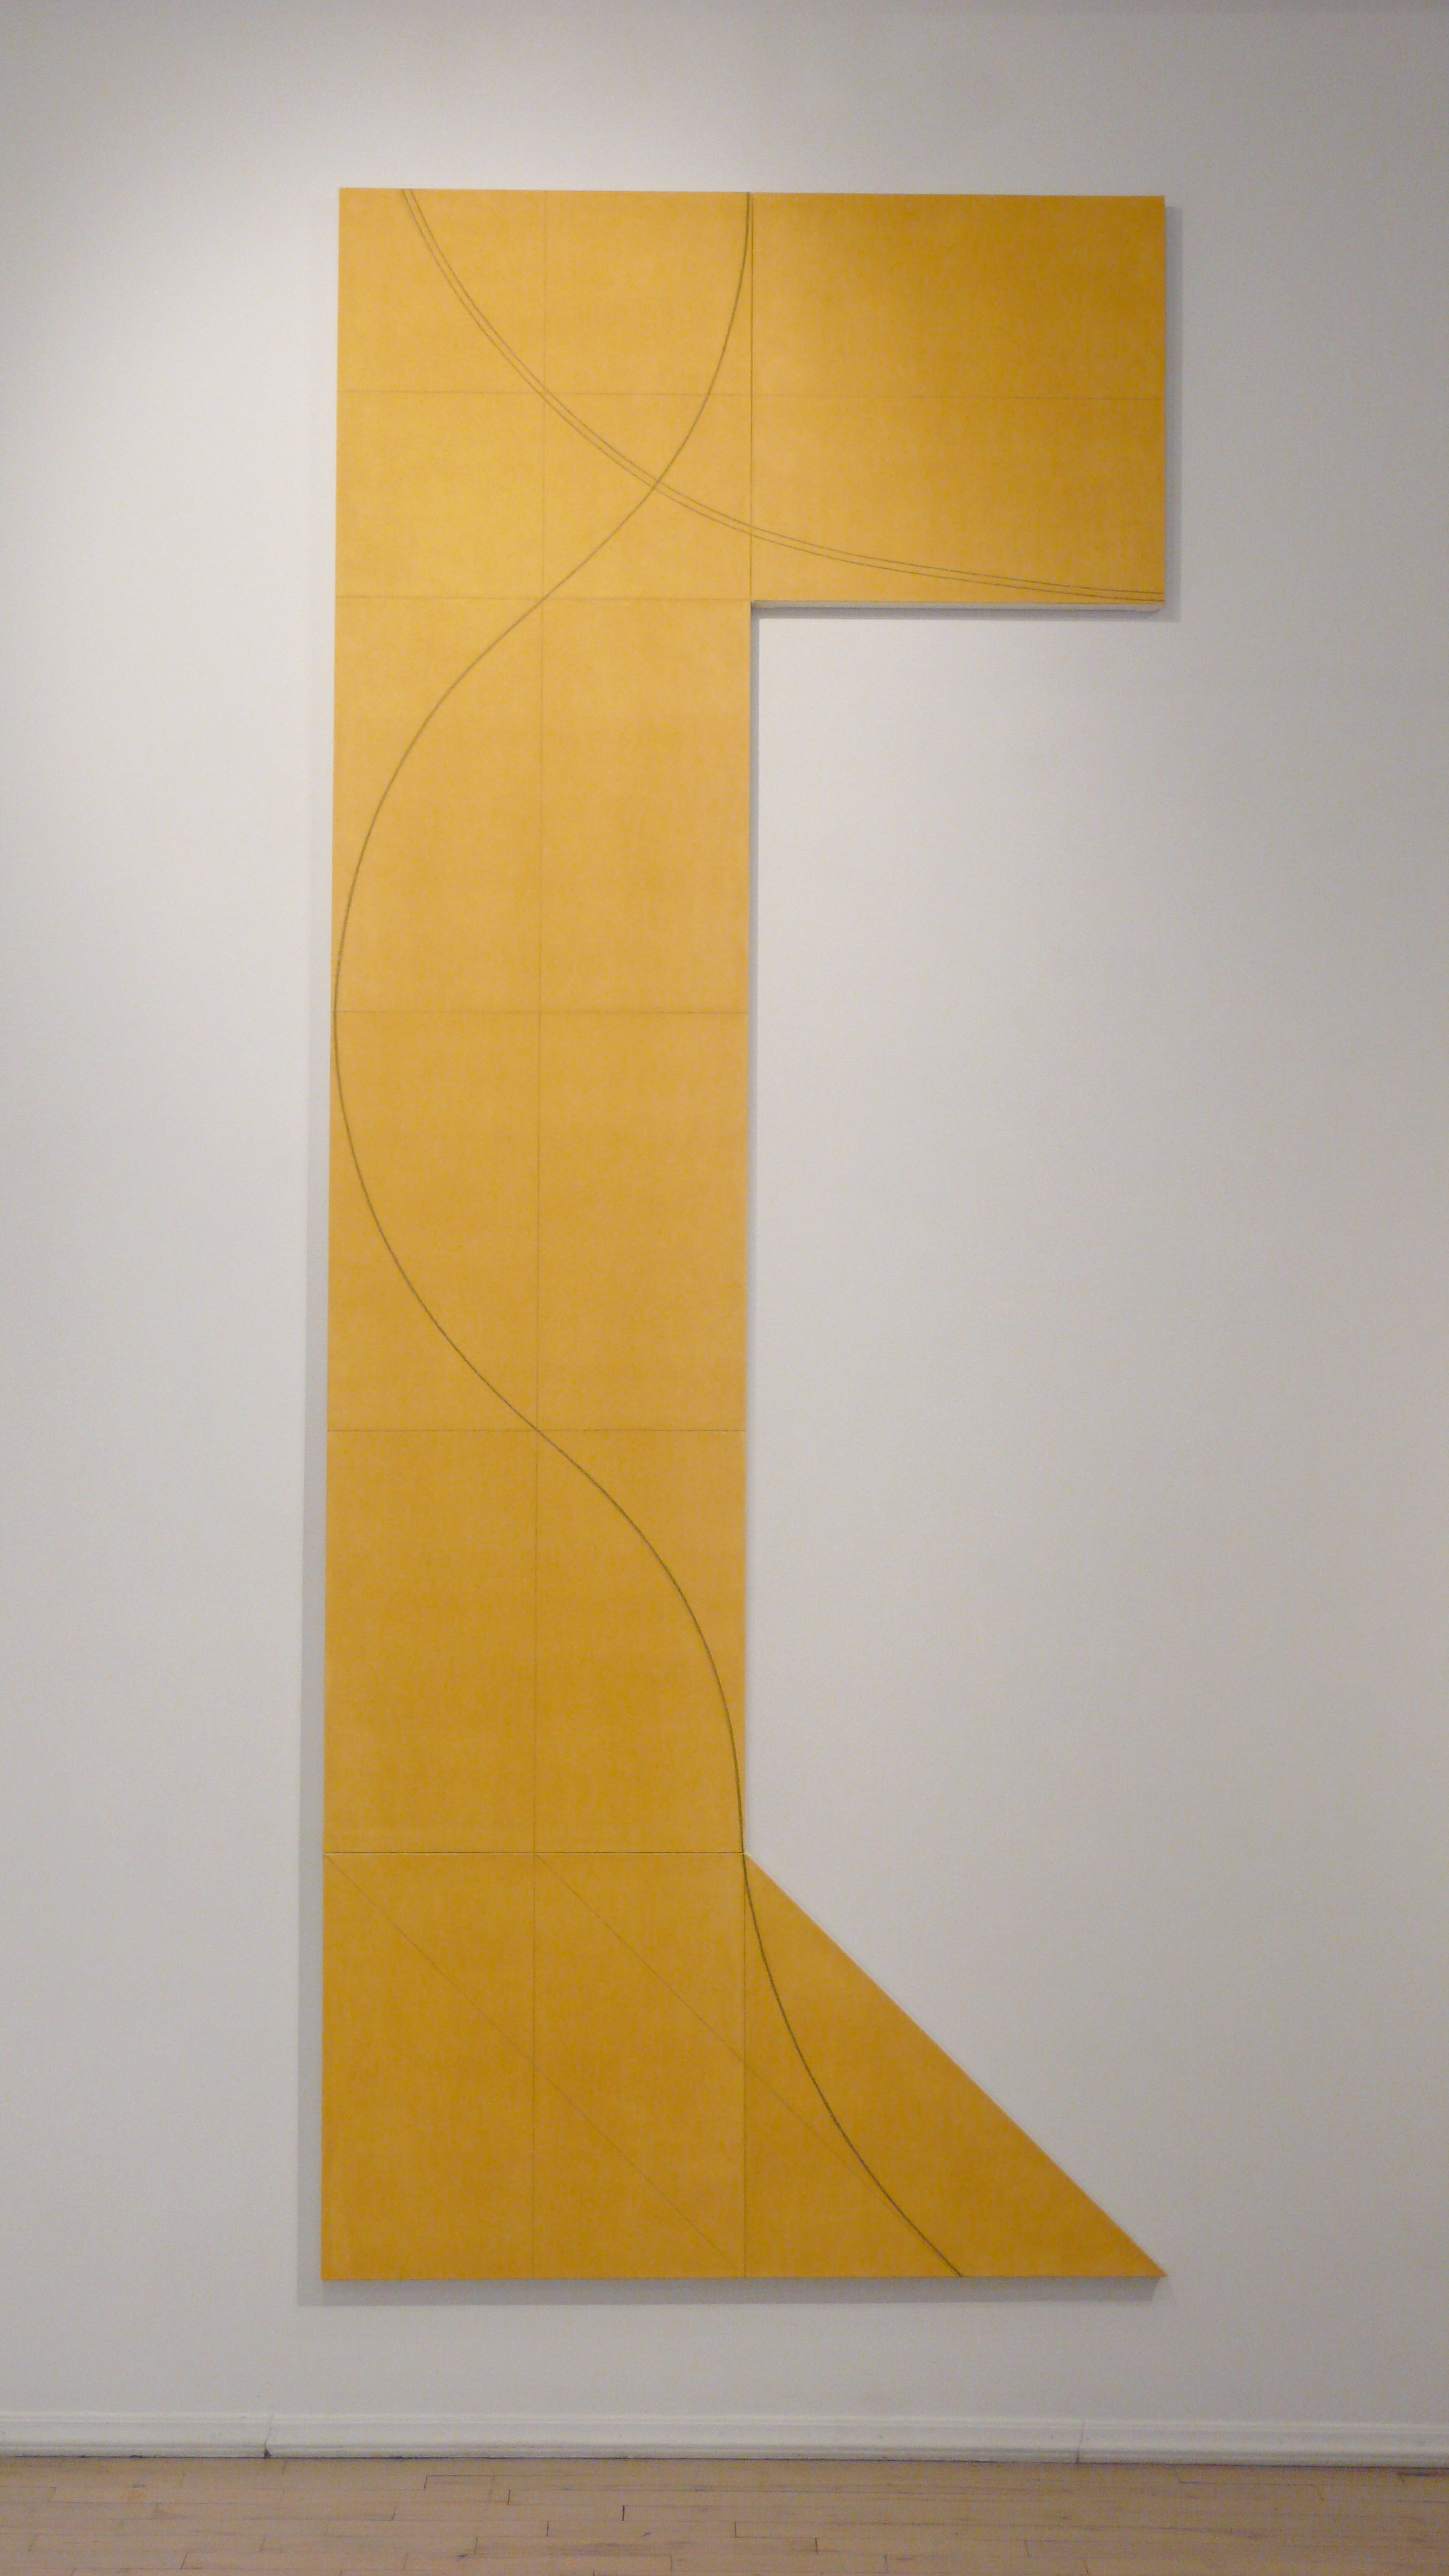  Robert Mangold   Column Structure XIII,  2007 acrylic and pencil on canvas 304 4/5 x 121 9/10 inches 